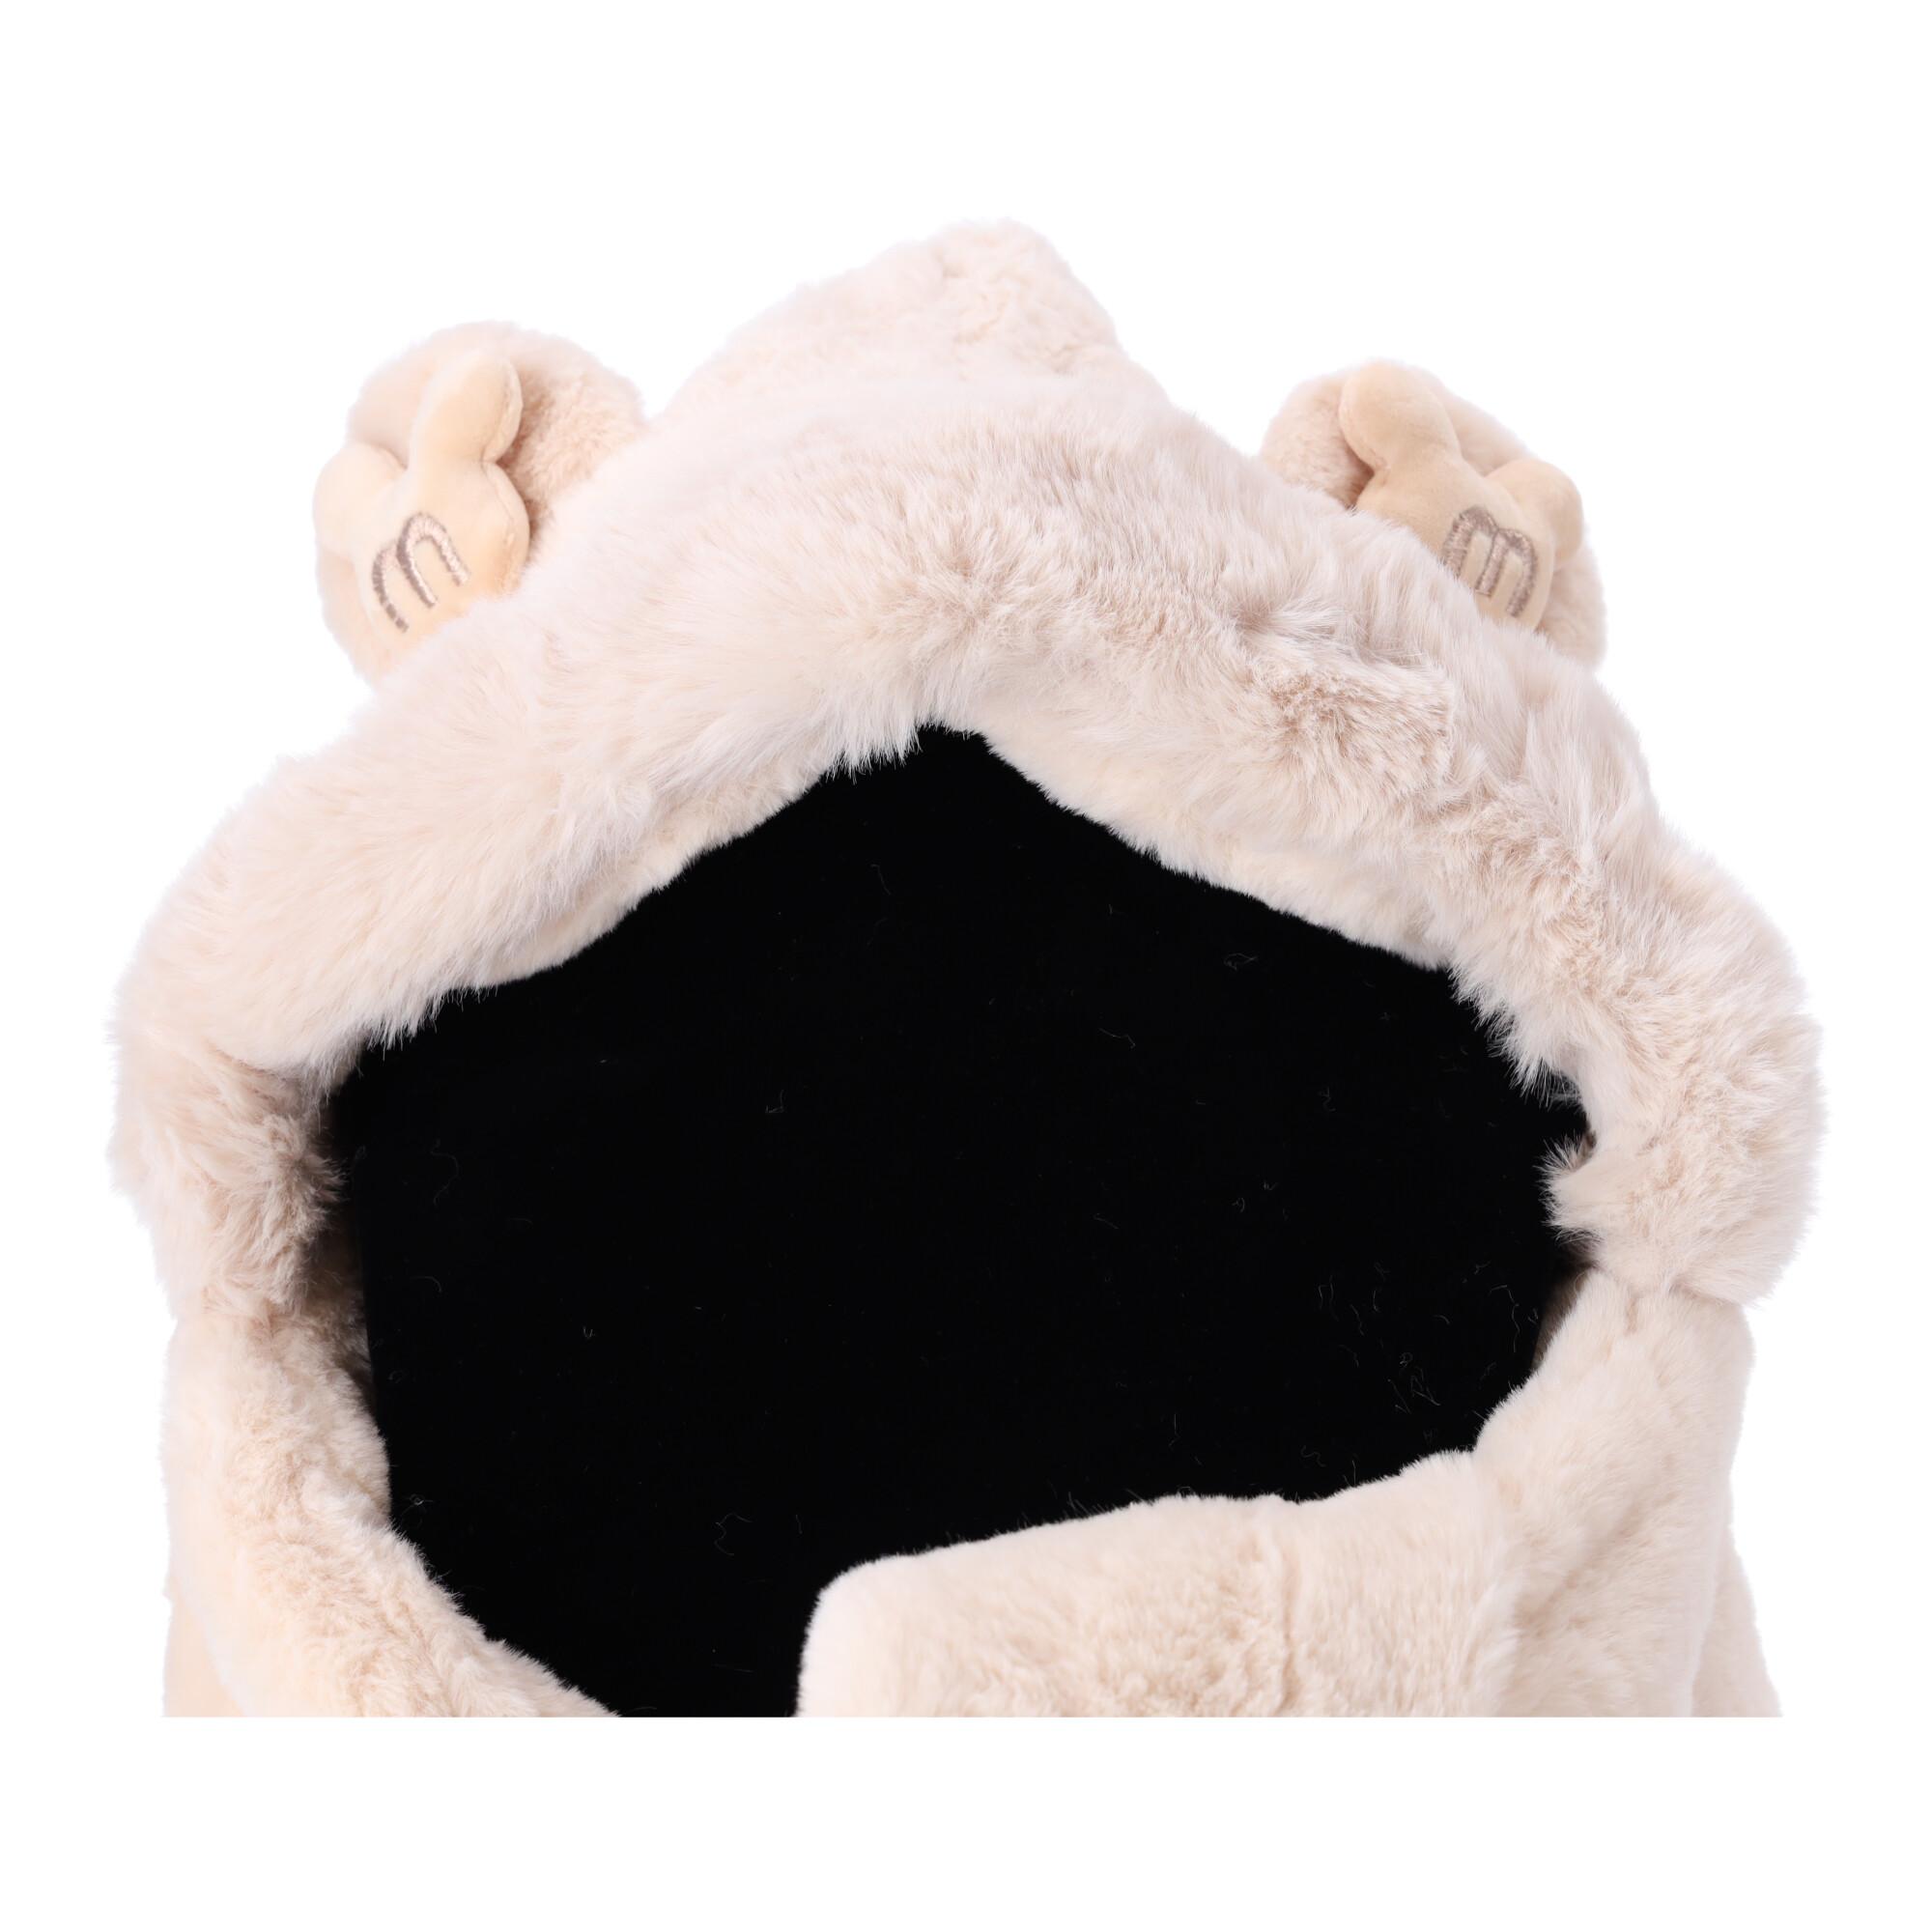 Children's plush hat with a scarf and 3in1 gloves for children from 2 to 12 years old - beige